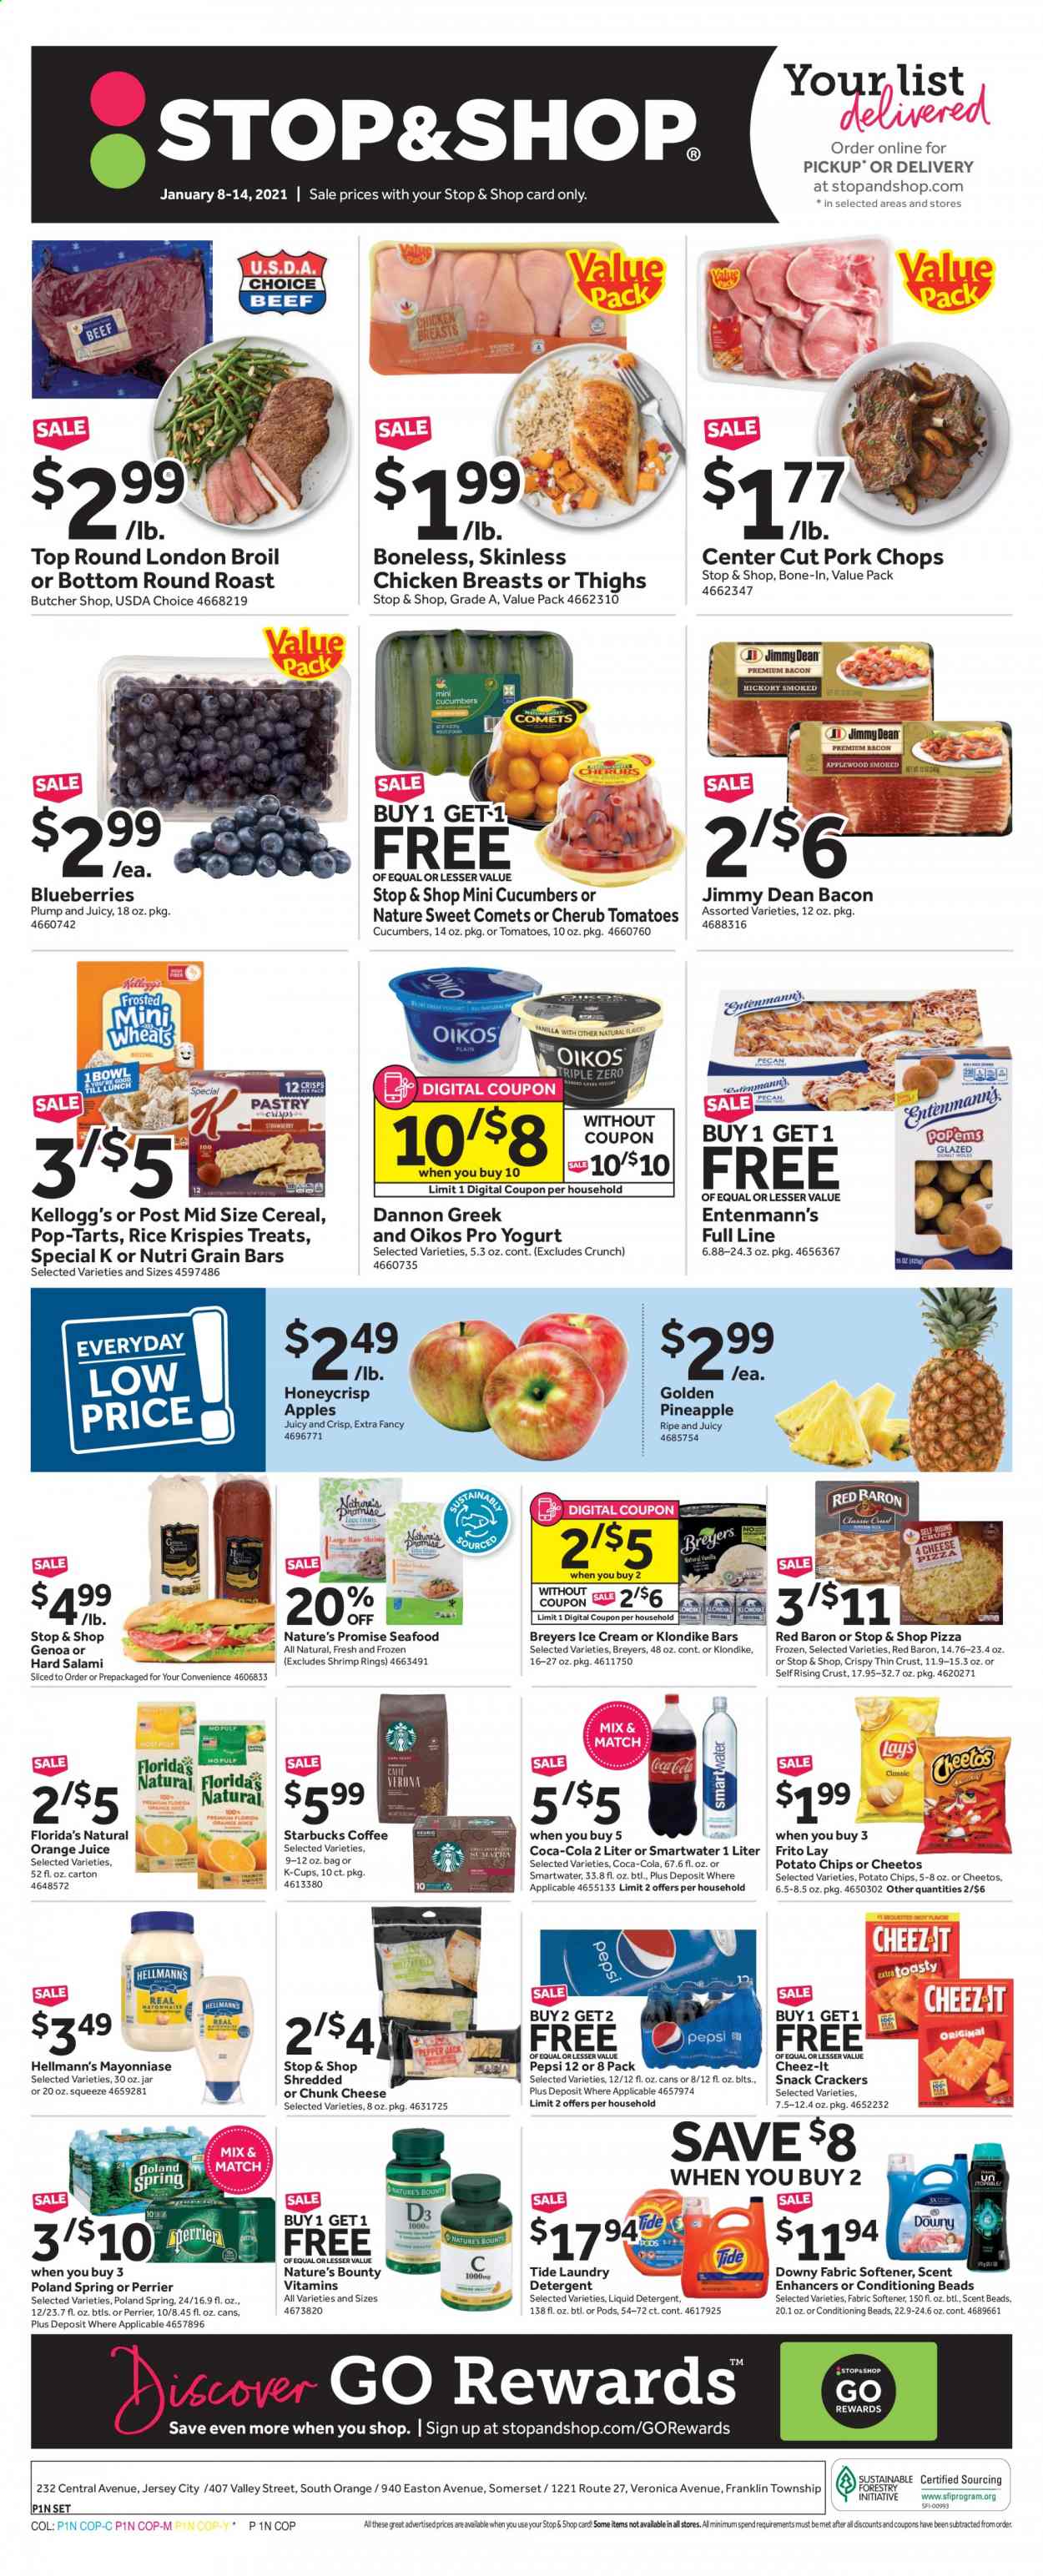 thumbnail - Stop & Shop Flyer - 01/08/2021 - 01/14/2021 - Sales products - blueberries, Nature’s Promise, Entenmann's, apples, chicken breasts, beef meat, round roast, pork chops, pork meat, seafood, shrimps, pizza, Jimmy Dean, bacon, salami, cheese, chunk cheese, yoghurt, Oikos, Dannon, Hellmann’s, ice cream, Red Baron, Bounty, crackers, Kellogg's, Pop-Tarts, Florida's Natural, potato chips, Cheetos, snack, Cheez-It, cereals, Rice Krispies, Nutri-Grain, Coca-Cola, Pepsi, orange juice, juice, Perrier, Starbucks, coffee capsules, K-Cups, Tide, fabric softener, laundry detergent, conditioning beads, liquid detergent, Nature's Bounty. Page 1.